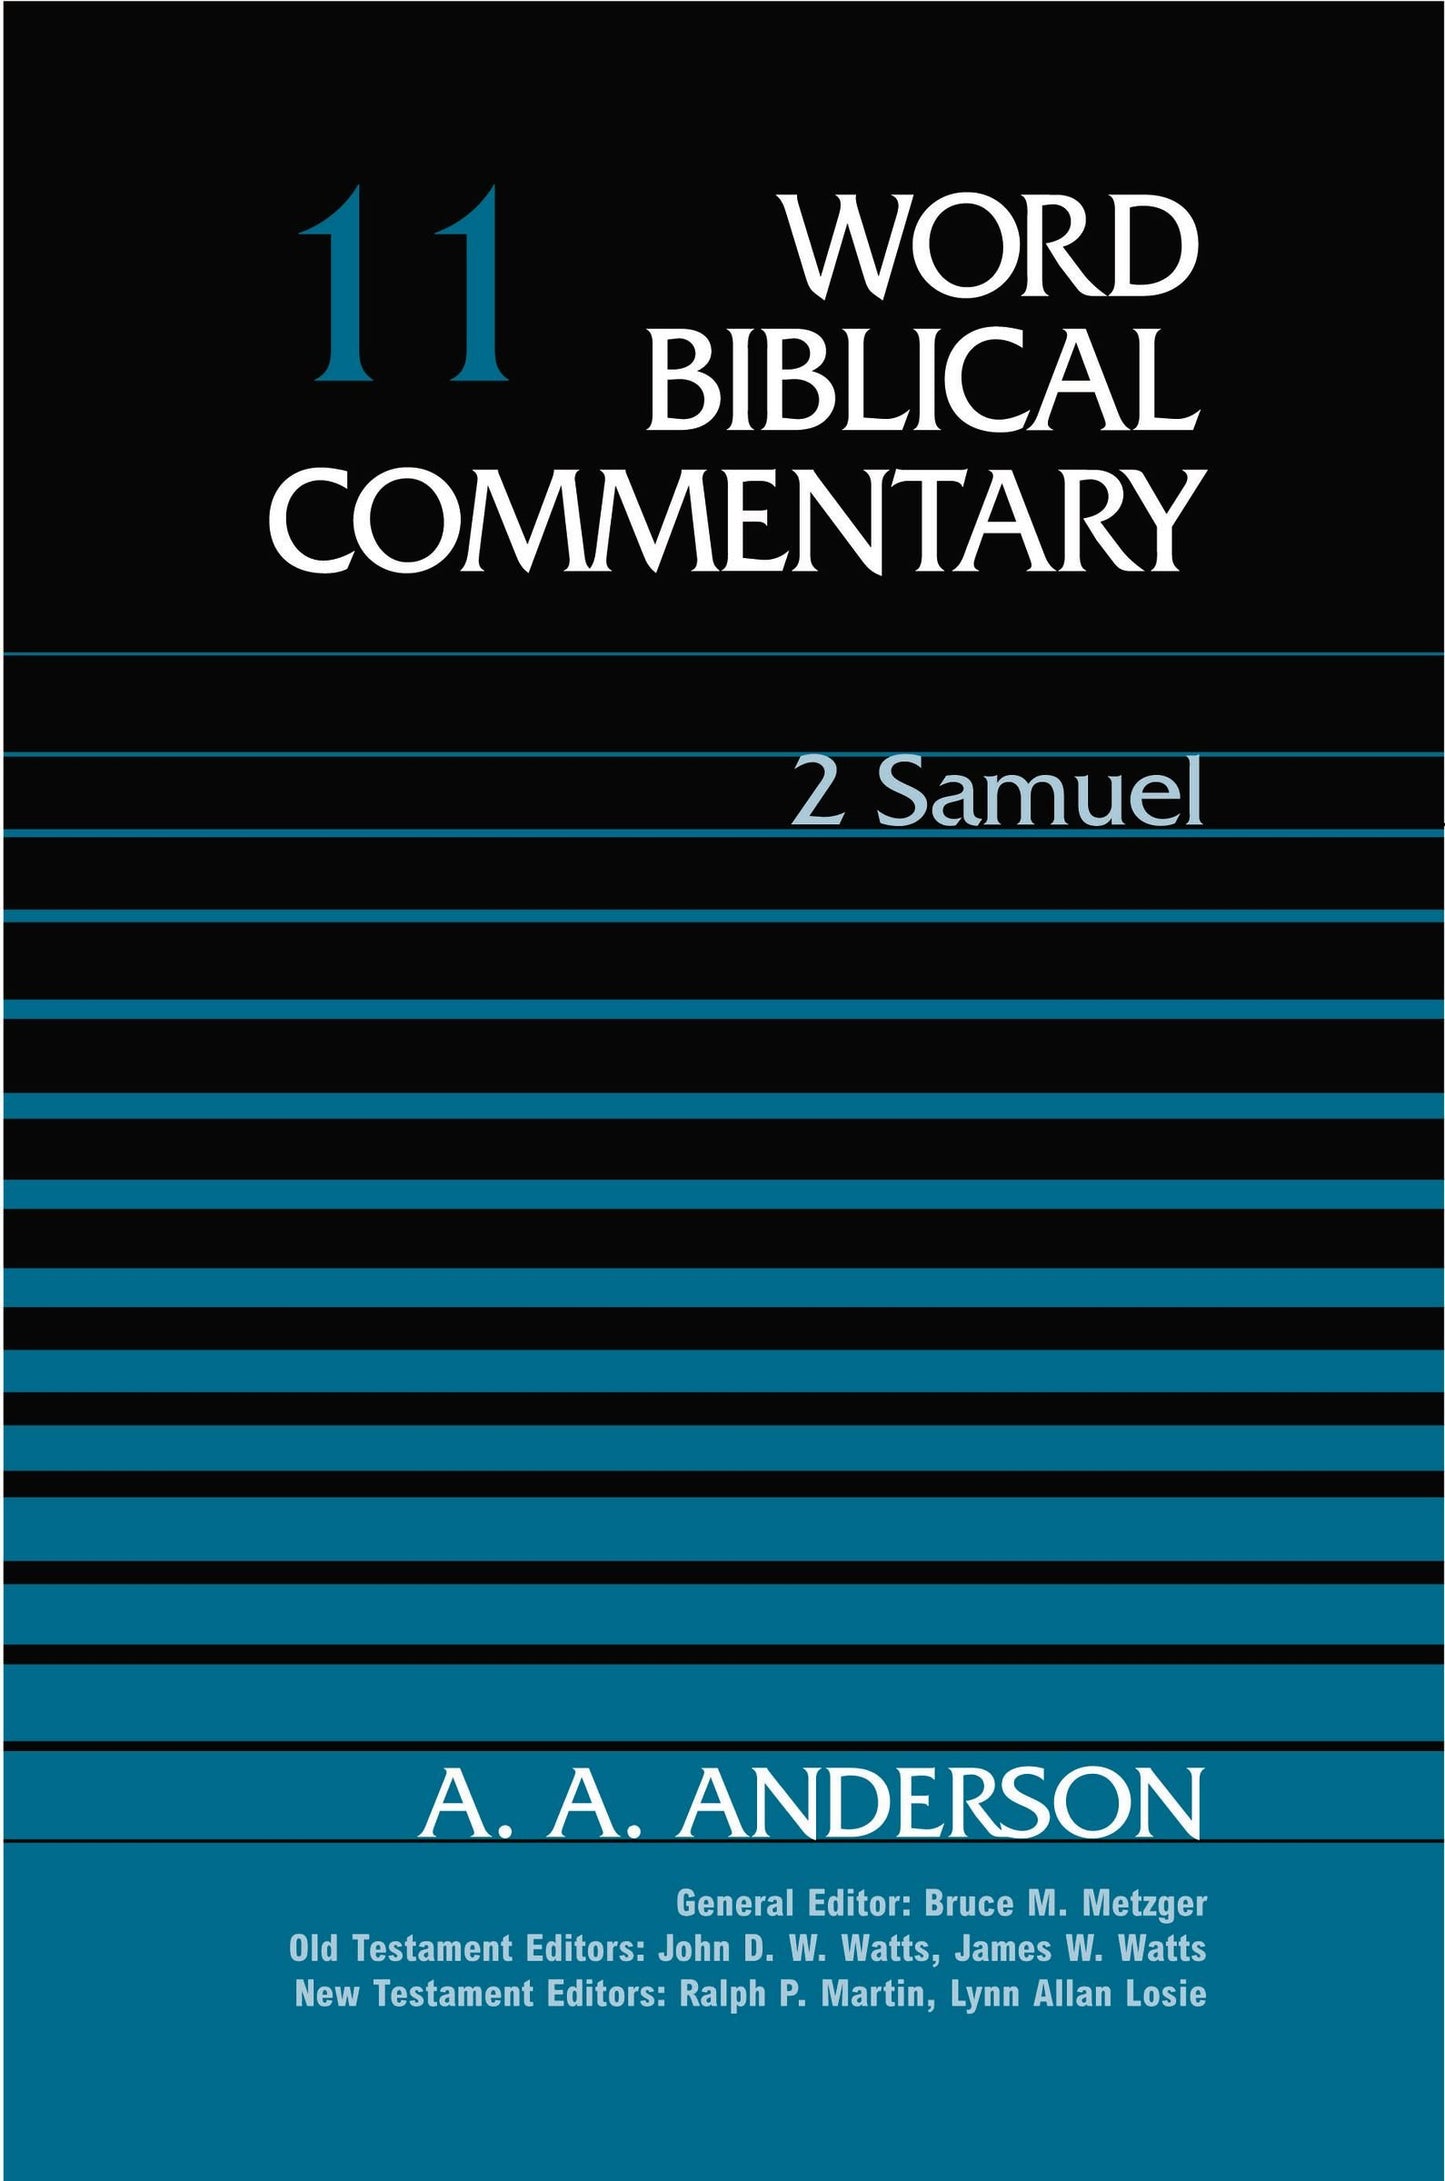 Word Biblical Commentary Vol. 11, 2 Samuel (Anderson)